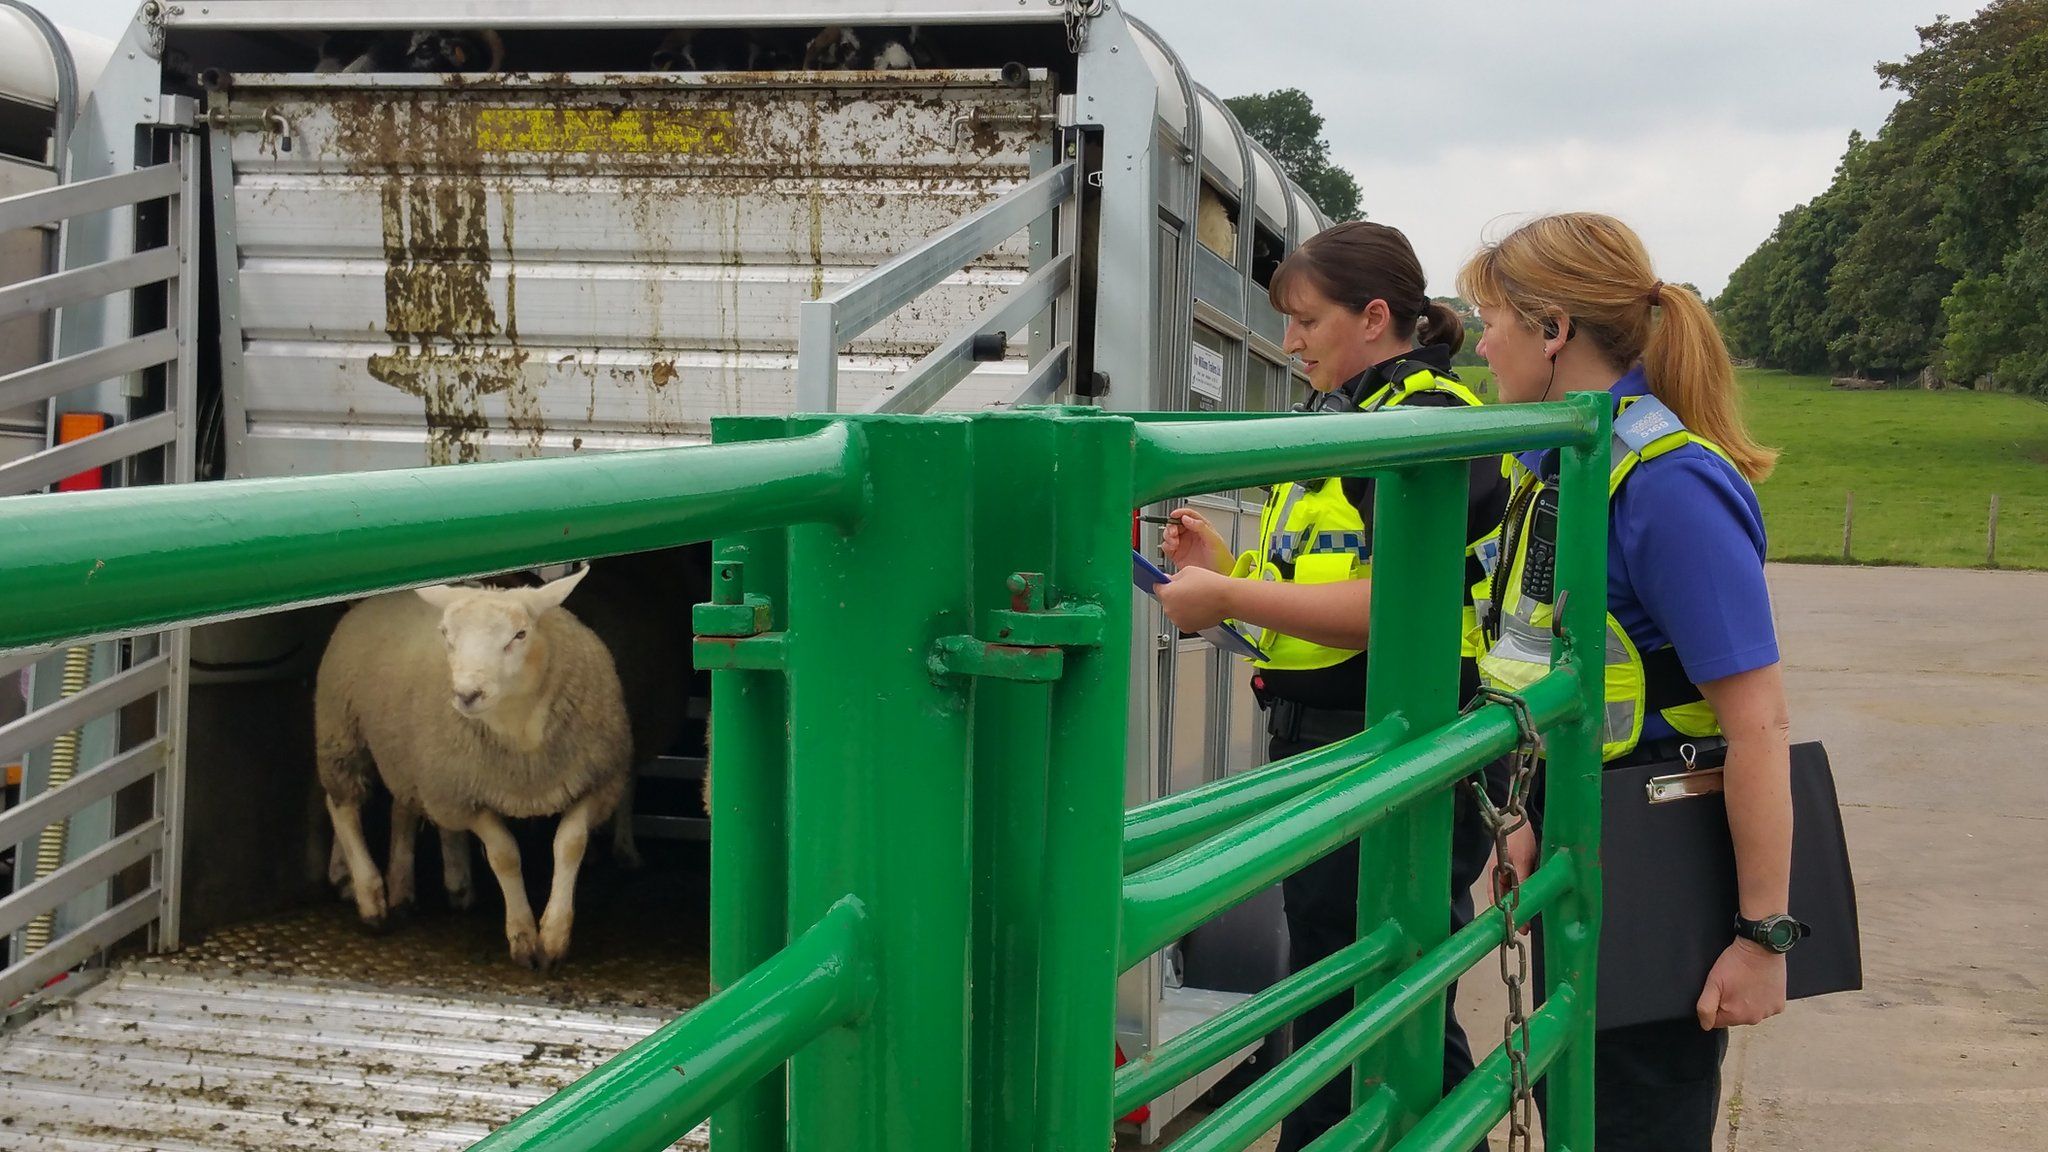 Cumbria police officers inspecting sheep in trailor